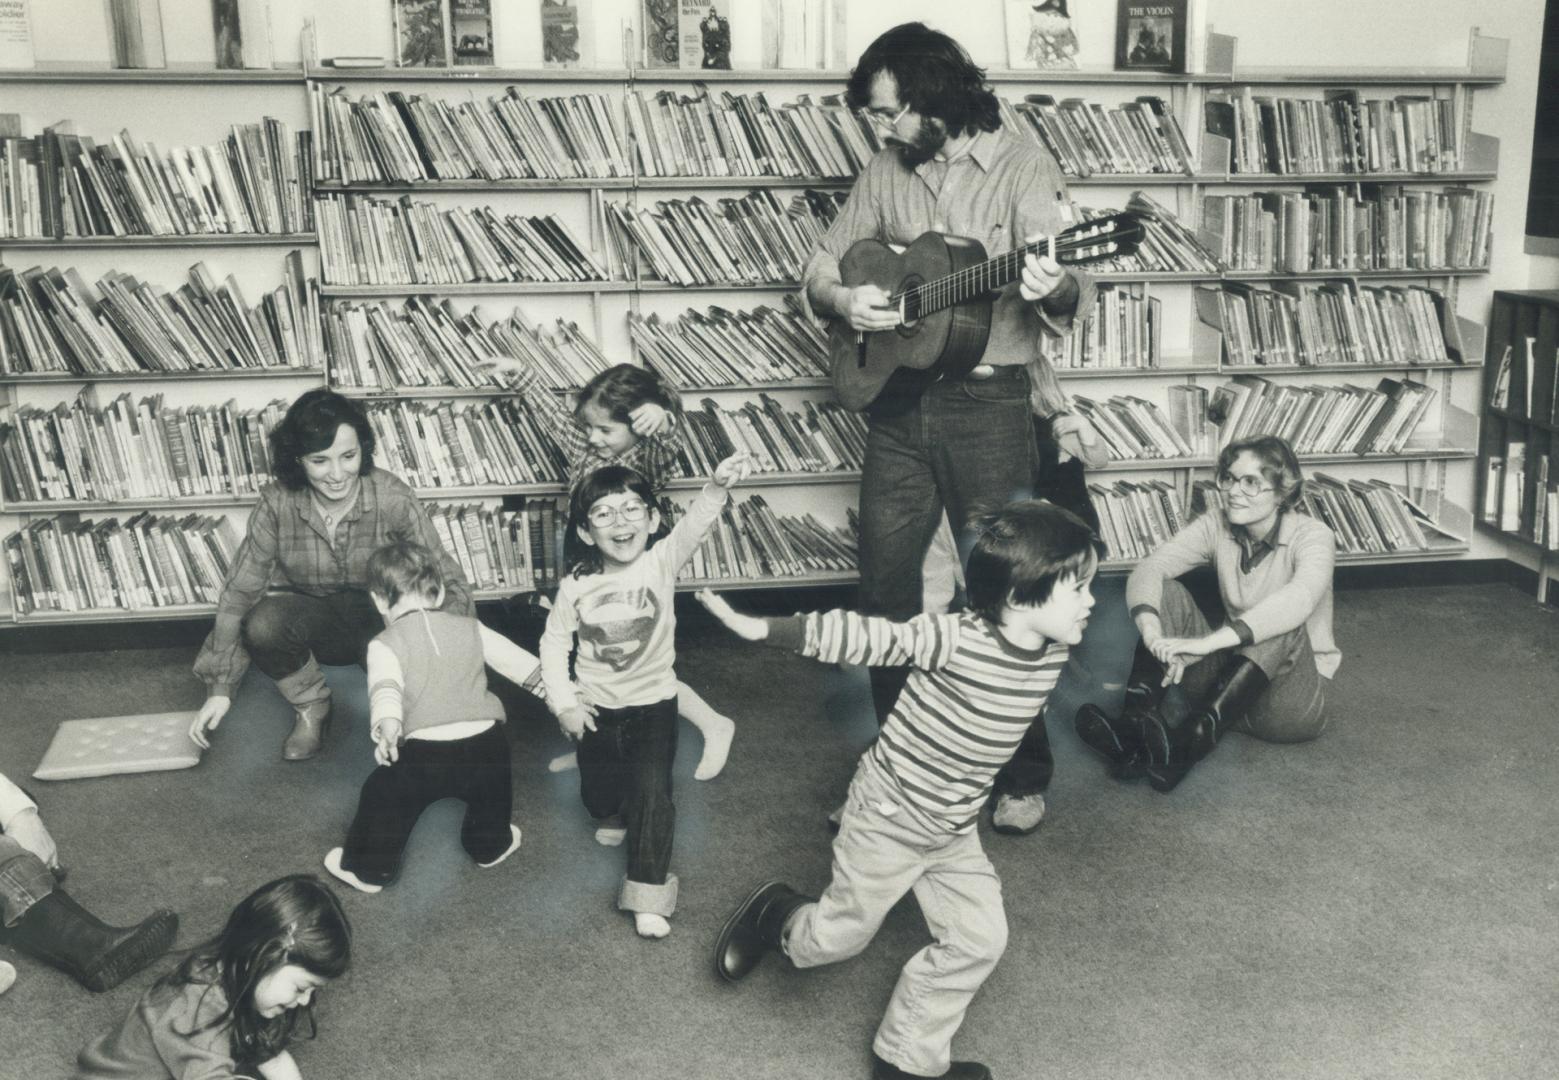 Music is fun. Musician and songwriter Doug Barr seems to have discovered the Pied Piper's magical notes as 4-year-olds Adam Kirch (front) and Lori Ste(...)